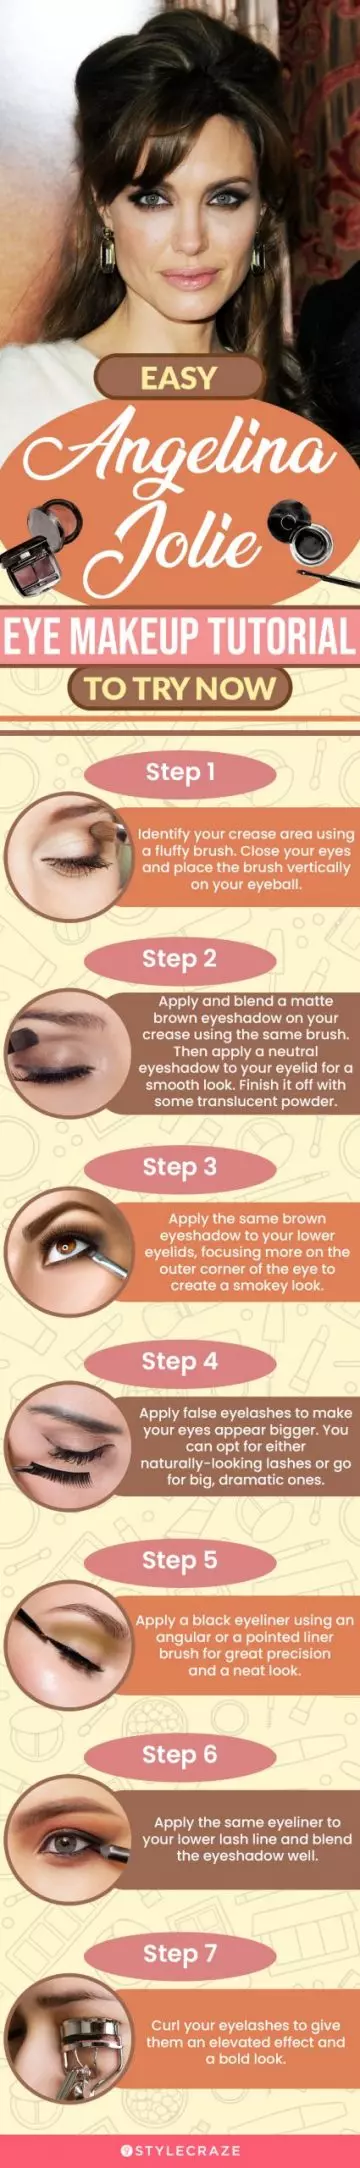 easy angelina jolie eye makeup tutorial to try now (infographic)